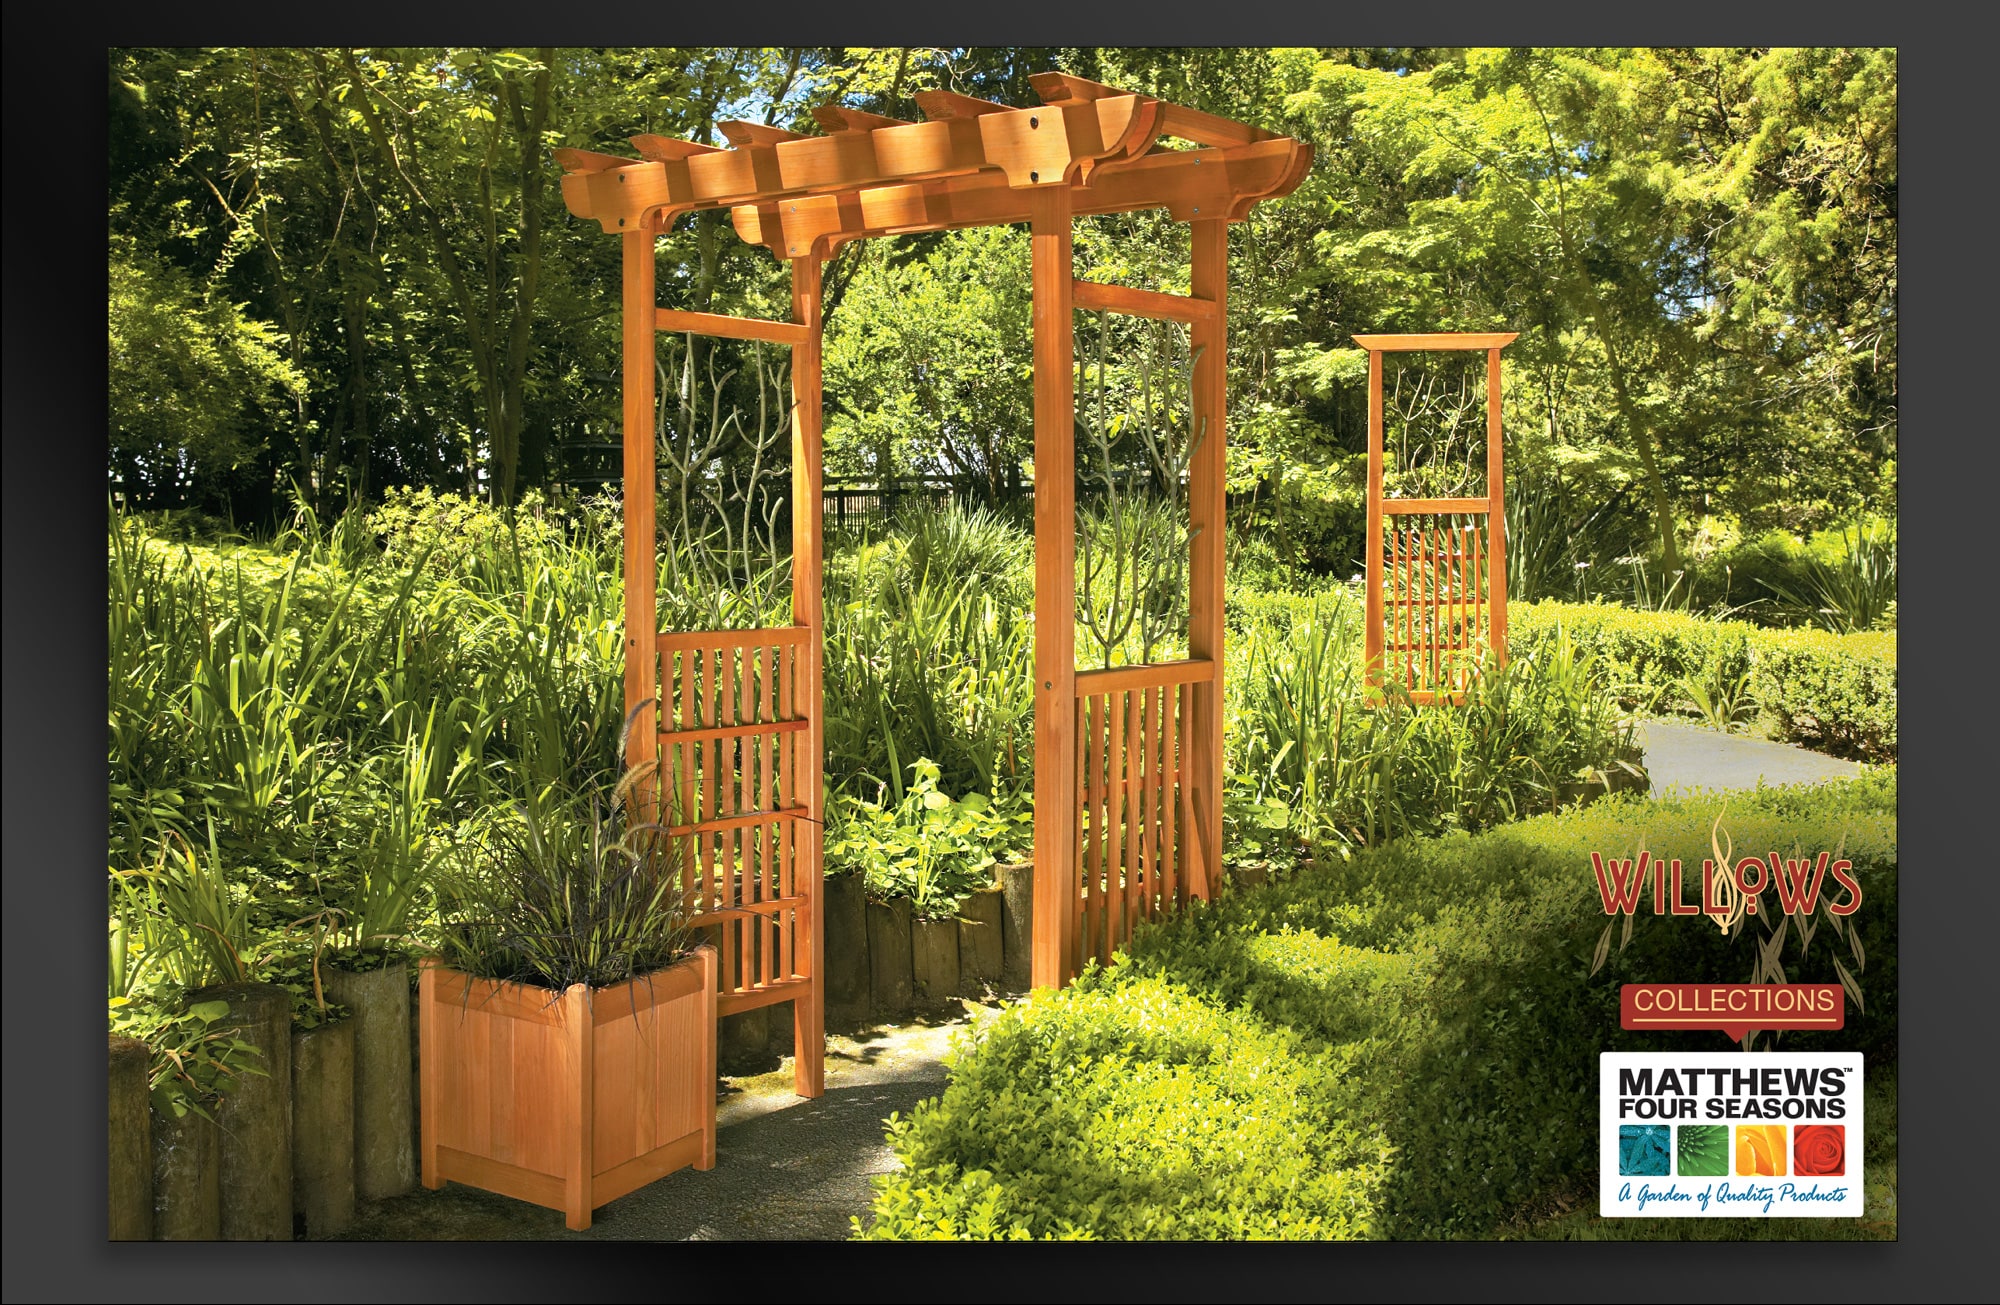  USA, Box, Arbor and Trellis In-Store Banners for The Willows Collections  